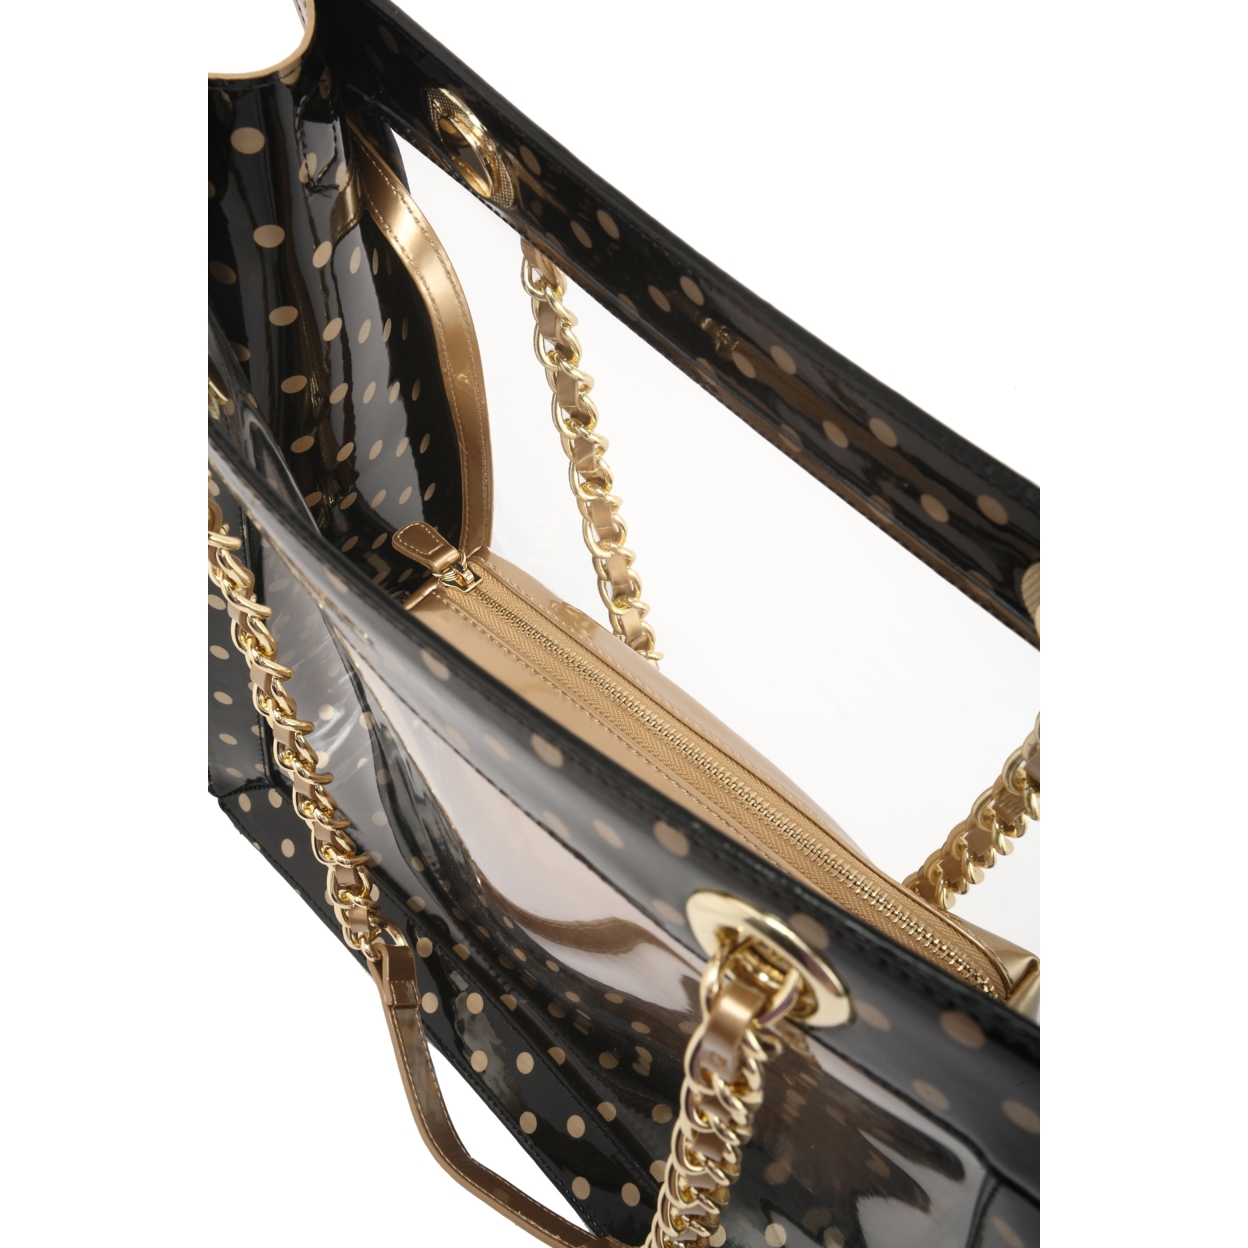 SCORE! Andrea Large Clear Designer Tote For School, Work, Travel- Black And Gold